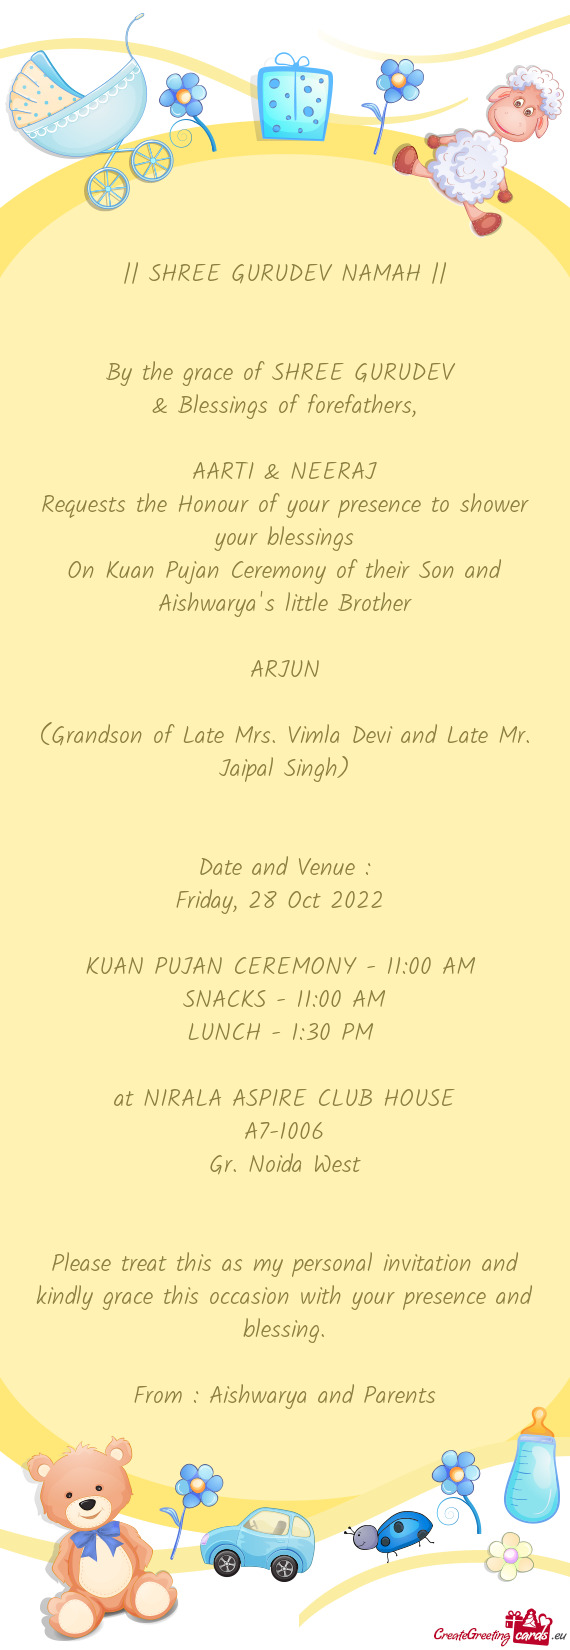 On Kuan Pujan Ceremony of their Son and Aishwarya